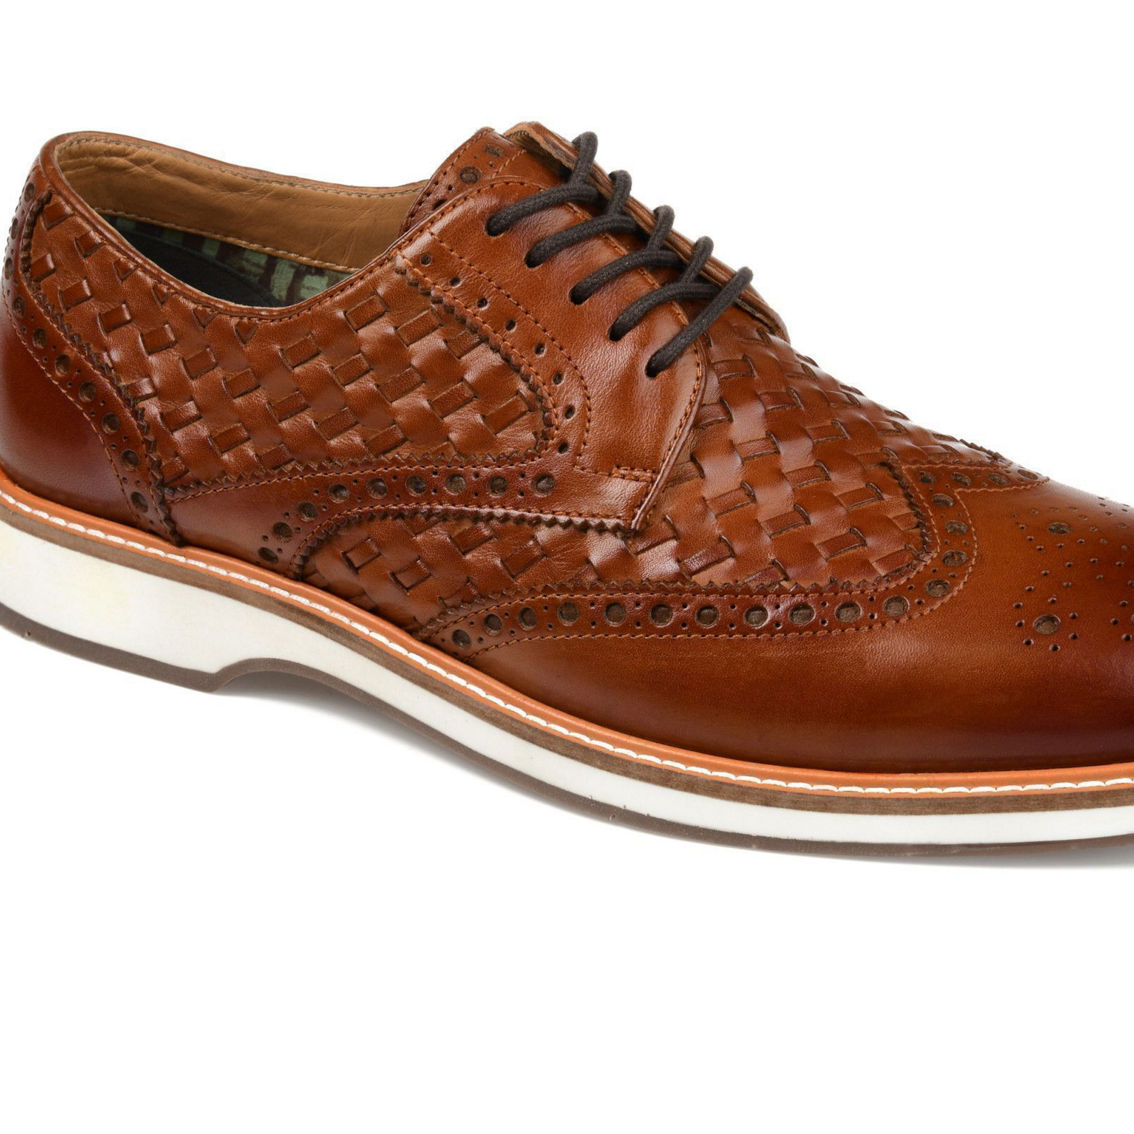 Thomas & Vine Radcliff Woven Wingtip Derby - Image 1 of 5